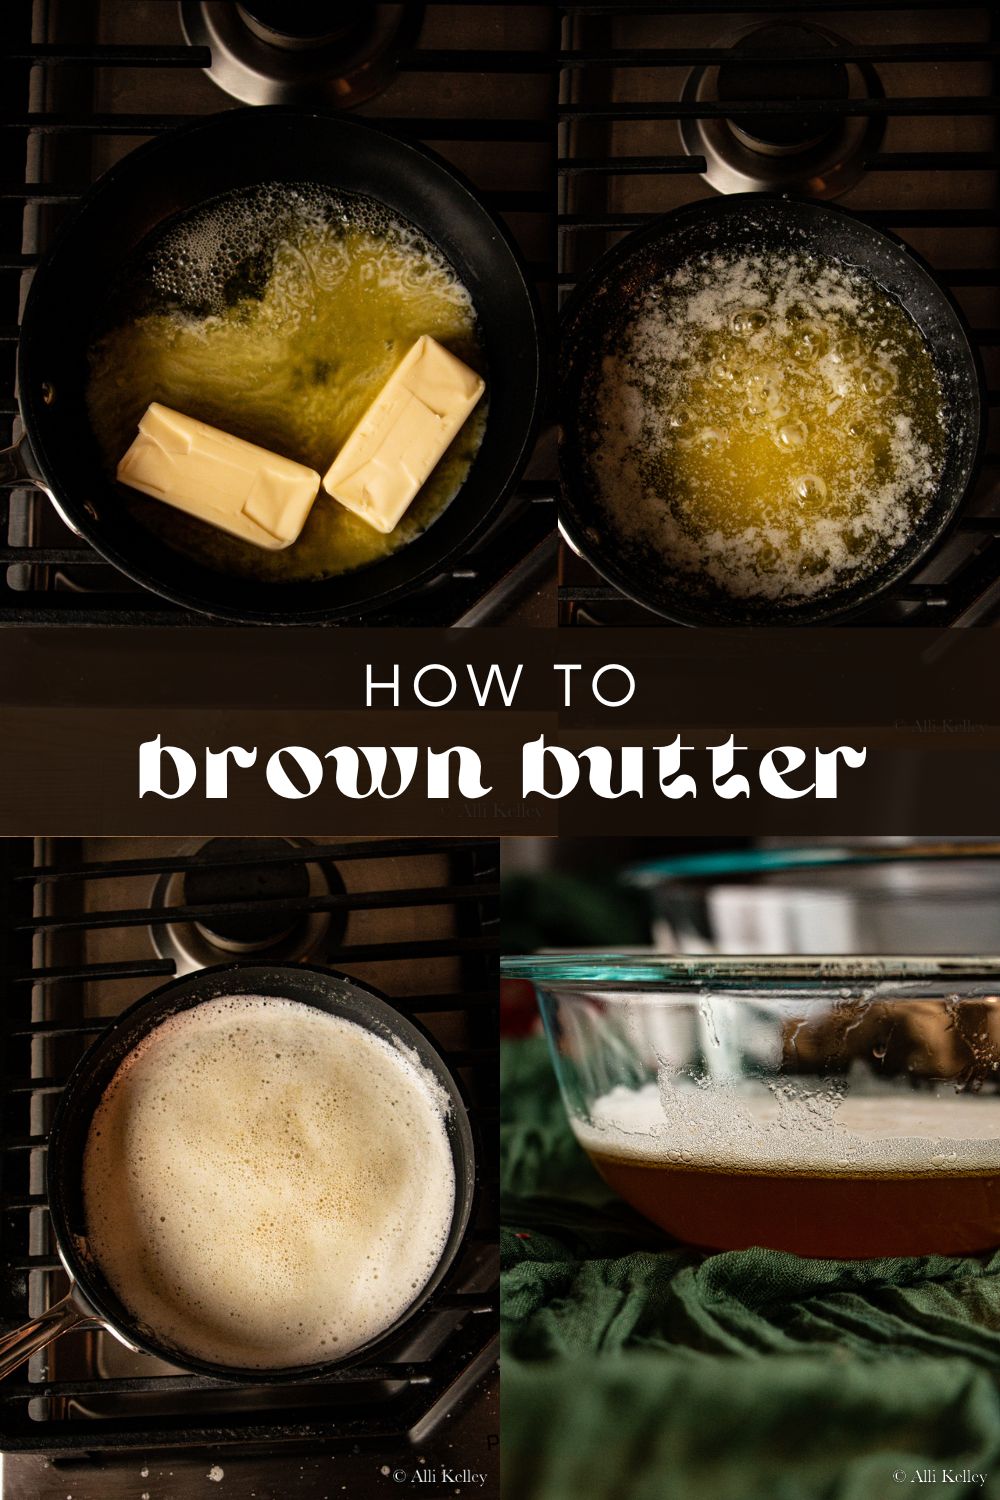 Once you've tried brown butter, there's no turning back - it will be your new best friend in the kitchen! Rich and velvety, browned butter can transform any dish from ordinary to extraordinary by adding a new dimension of mouth-watering flavor. Once you know how to brown butter, you'll crave its nutty, buttery goodness on everything from pancakes to pasta!